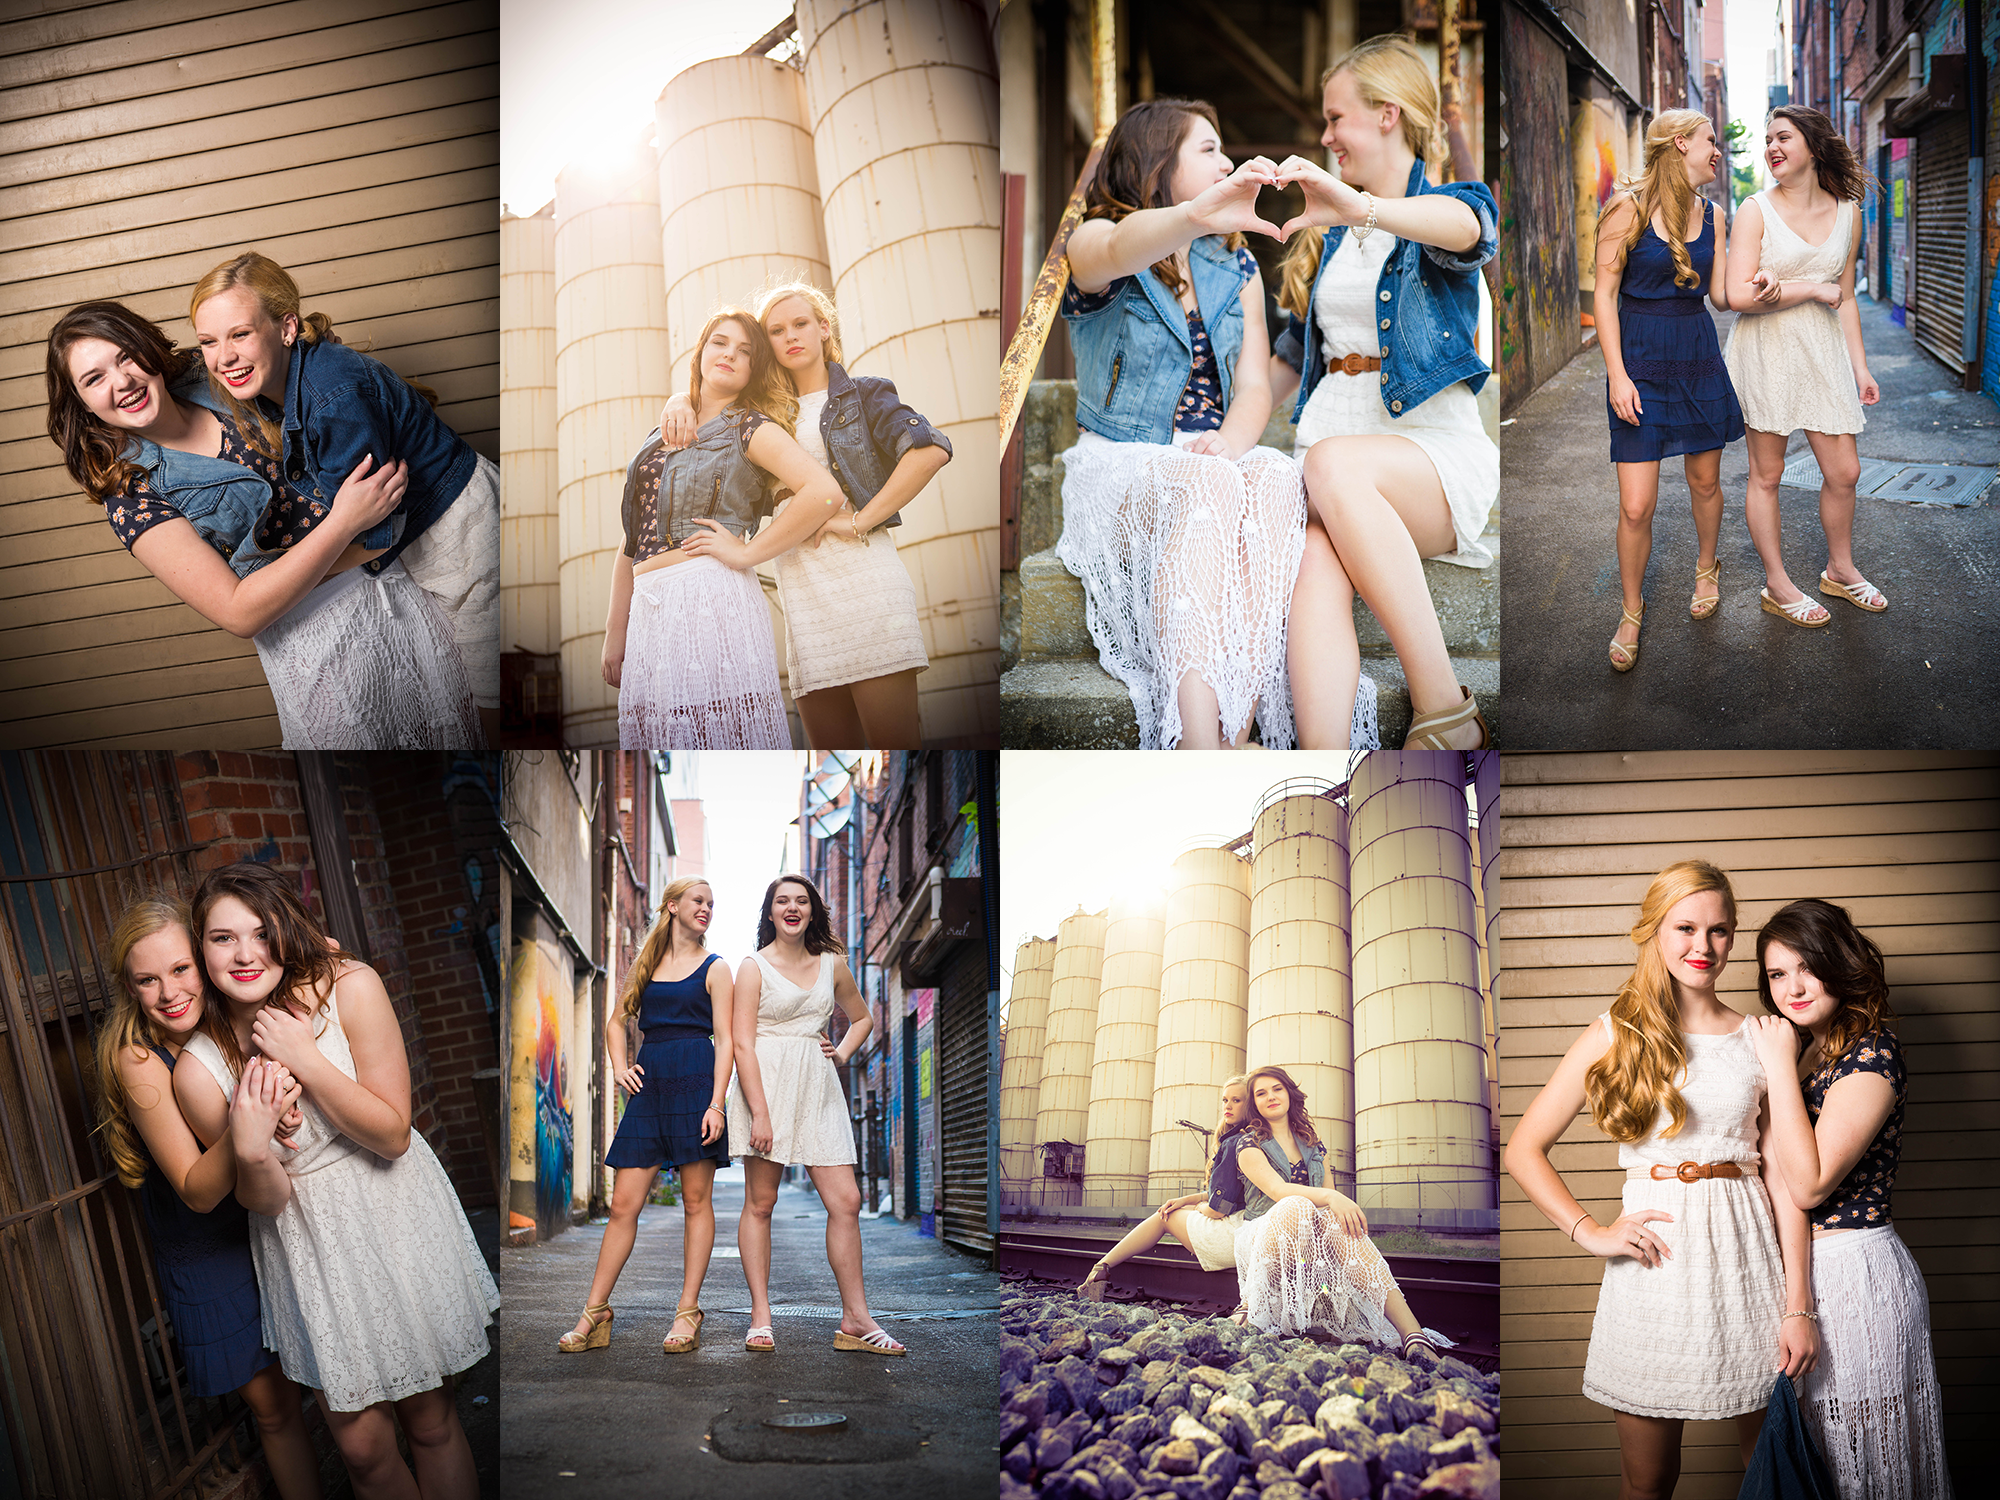 Teen BFF photoshoot in downtown knoxville